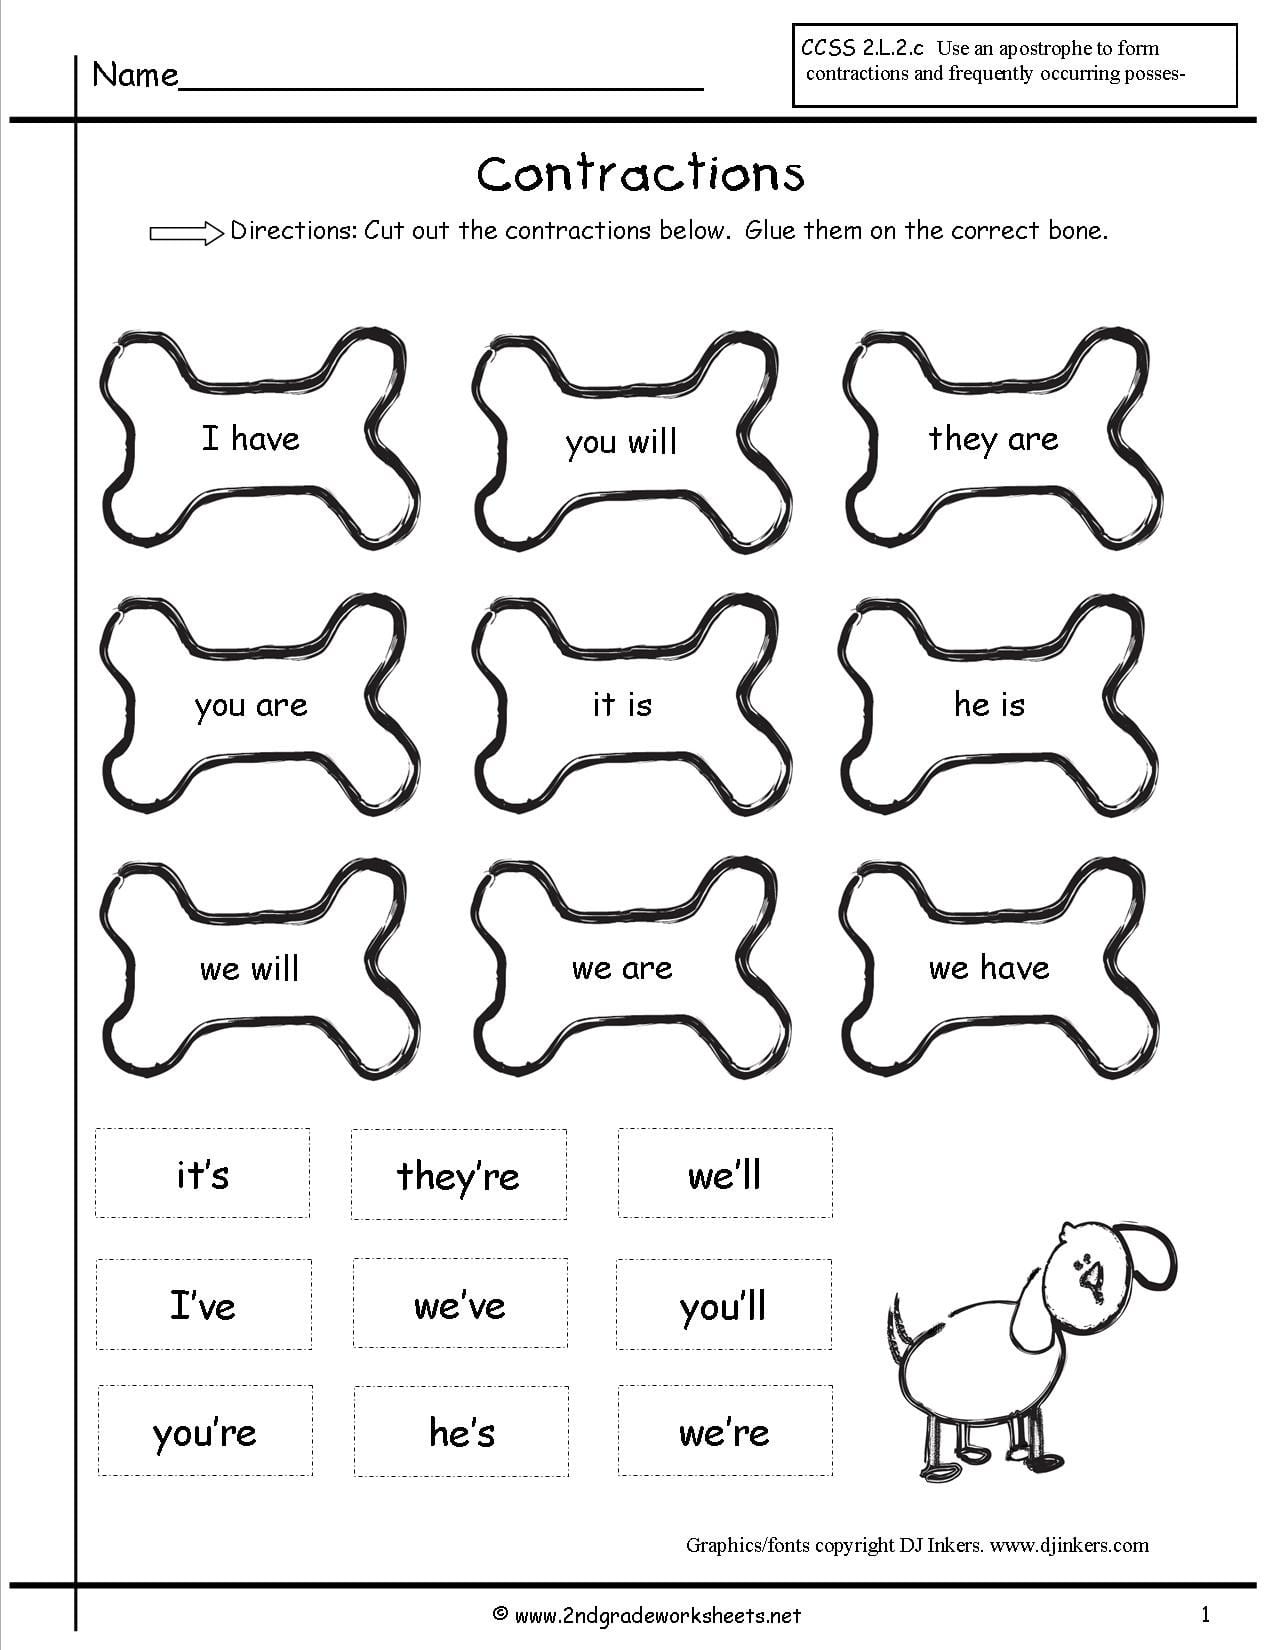 Free Contractions Worksheets And Printouts — db-excel.com